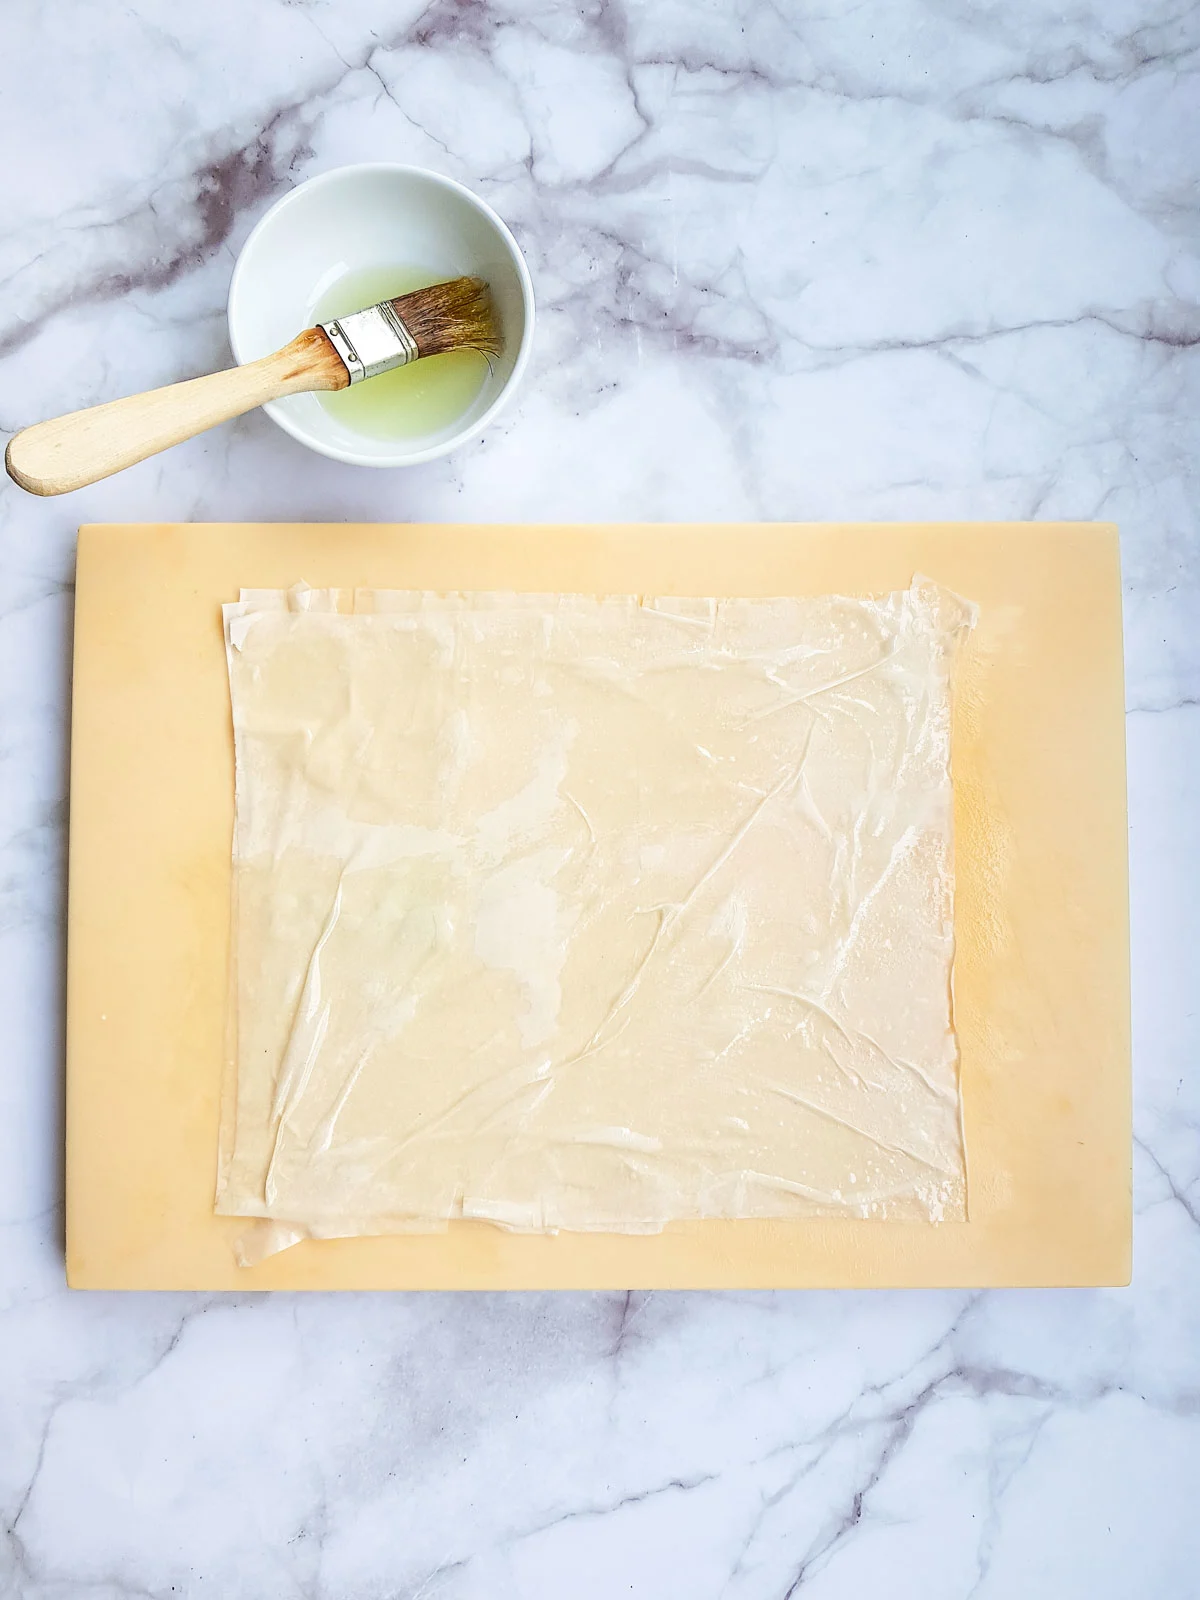 Phyllo dough sheets brushed with oil.